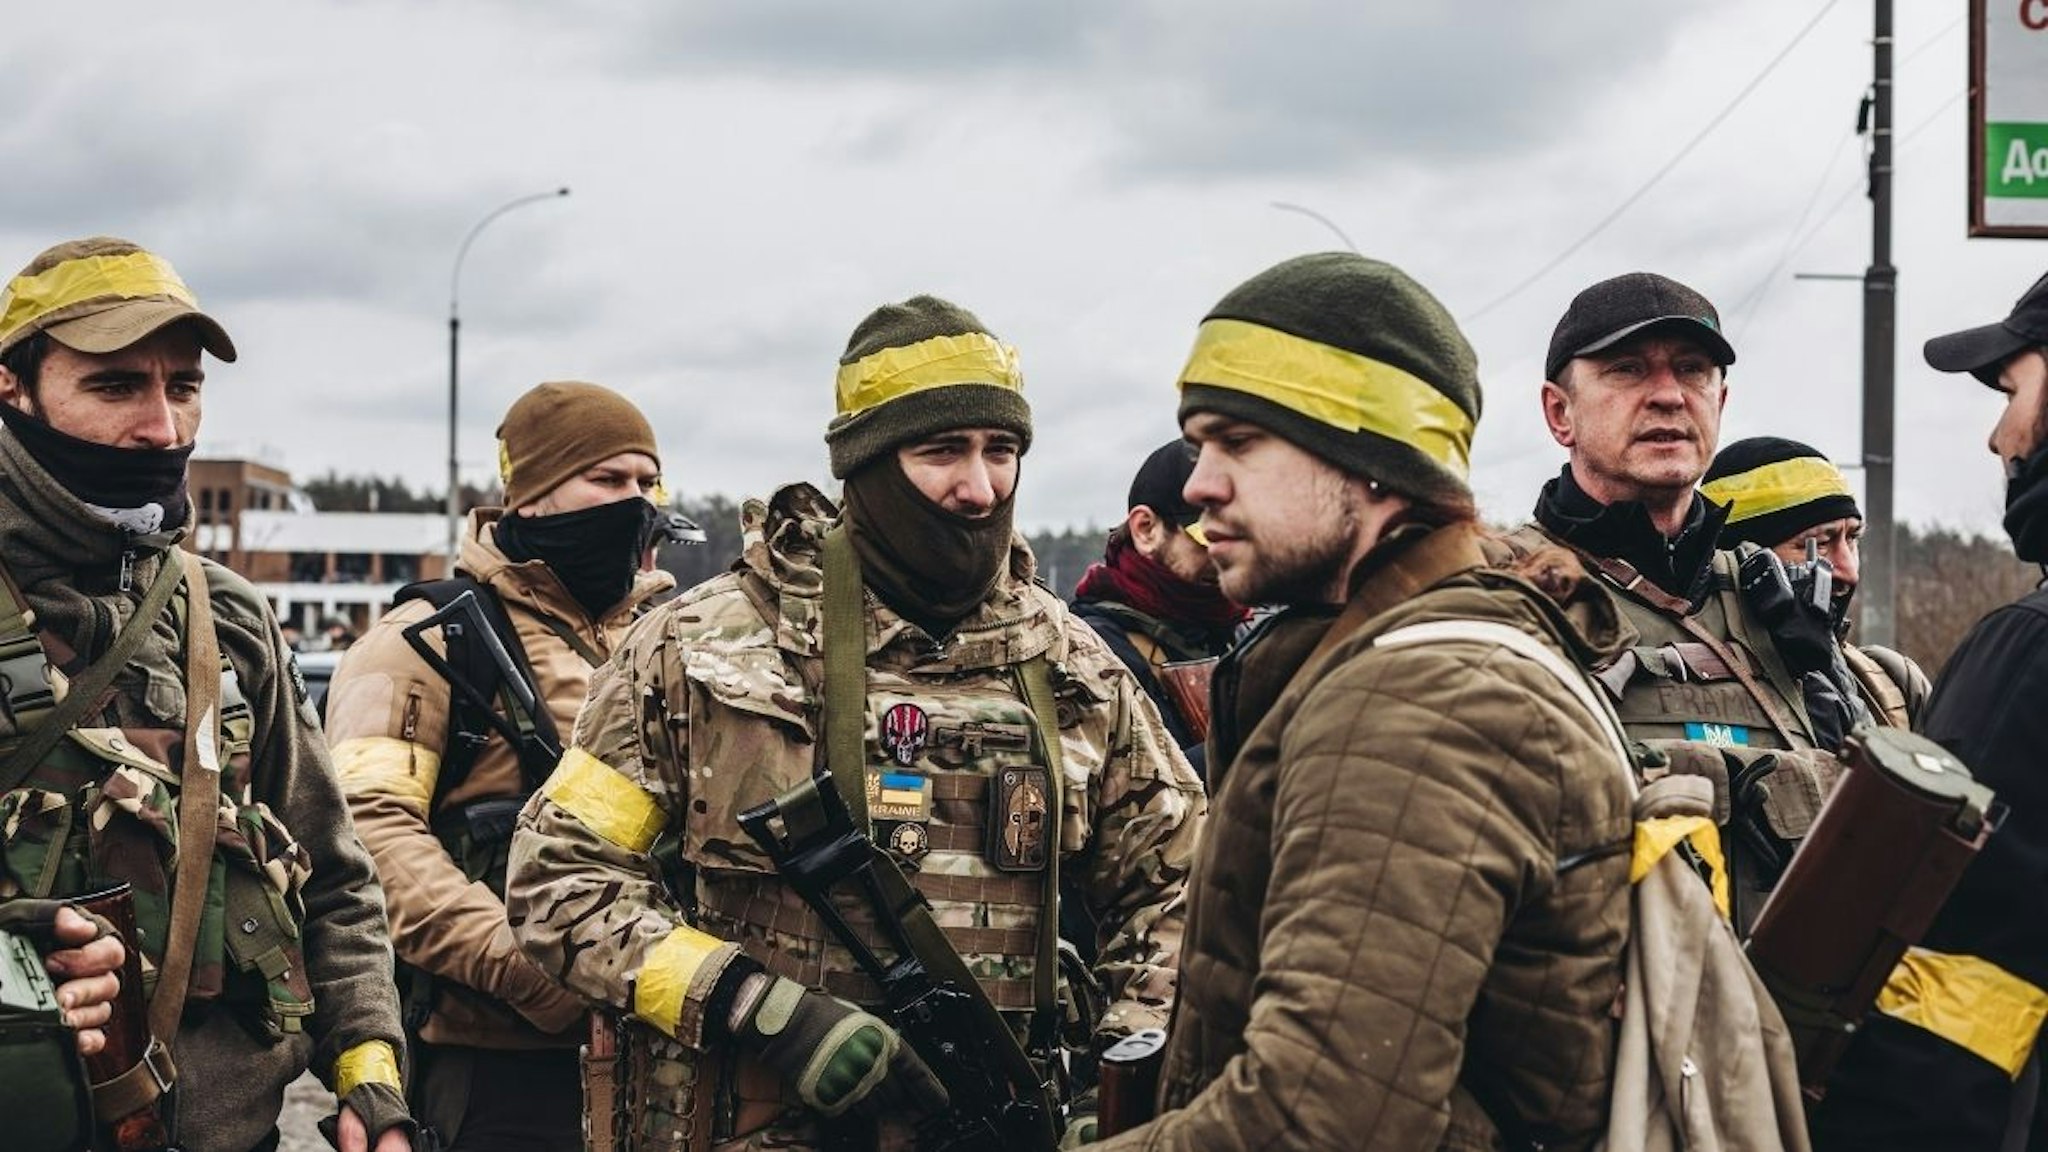 Ukrainian army soldiers talk together on March 4, 2022, in Irpin, Ukraine. Ukraine has been in the midst of an armed conflict for nine days following the start of attacks by Russia on February 24.